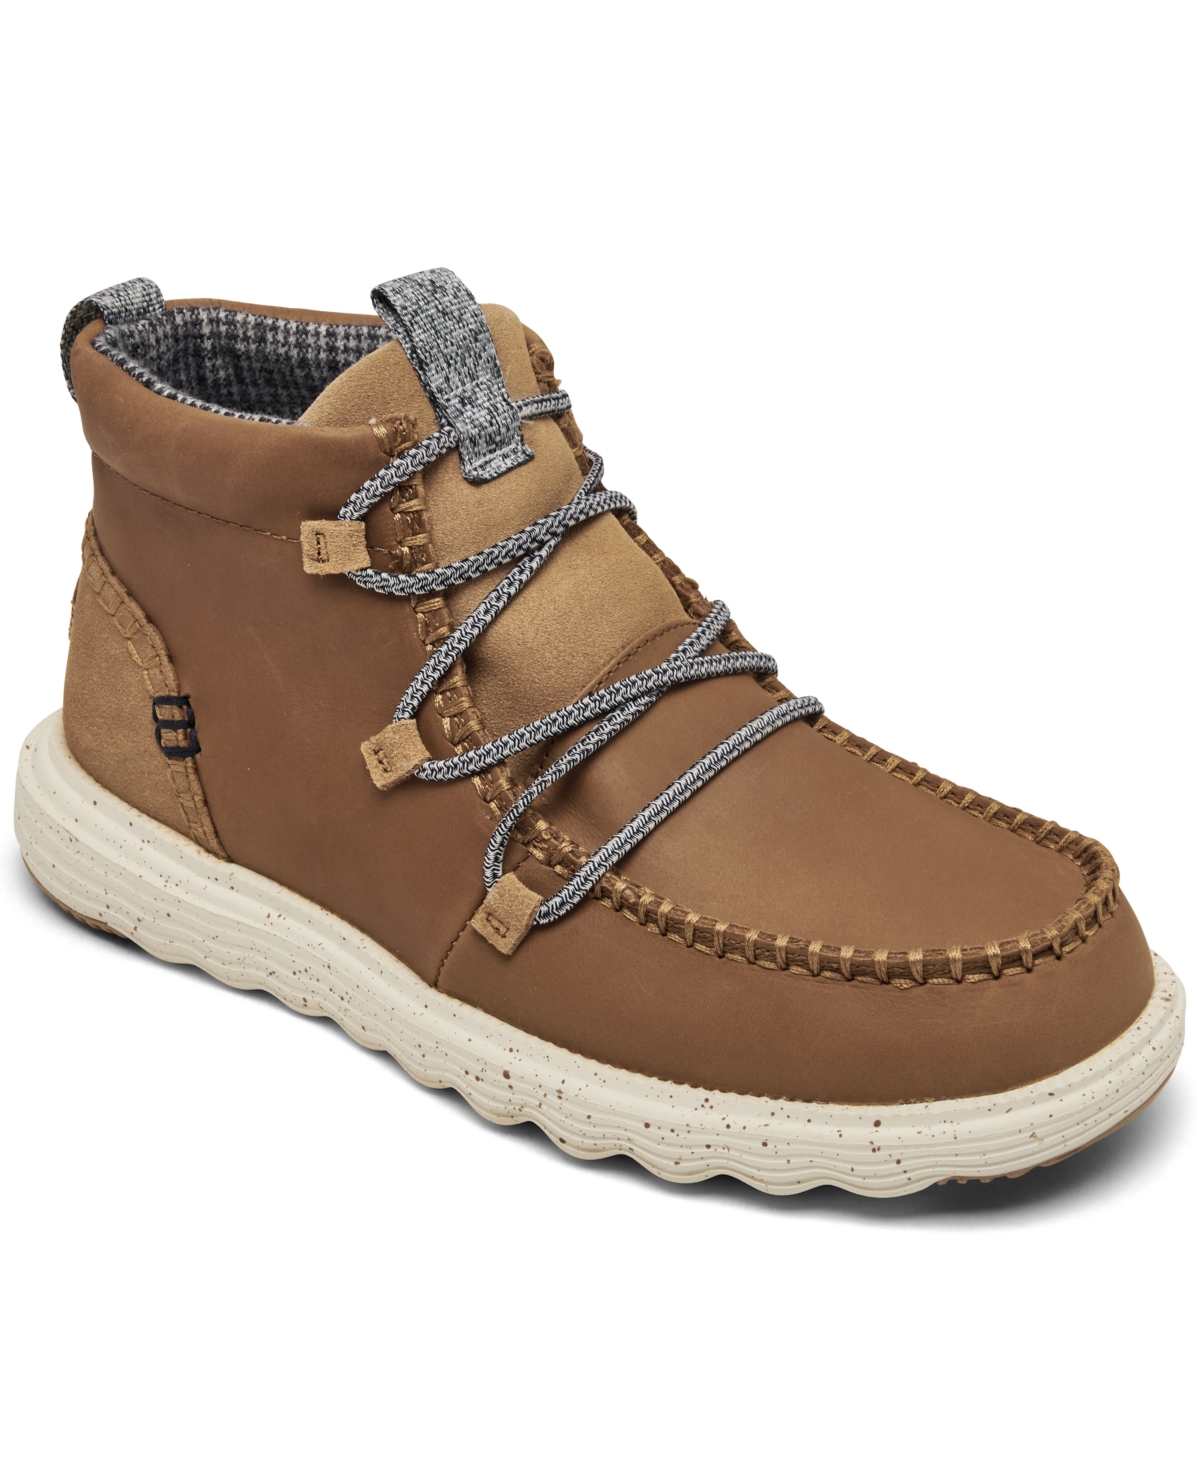 Women's Reyes Boots from Finish Line - Tobacco Brown